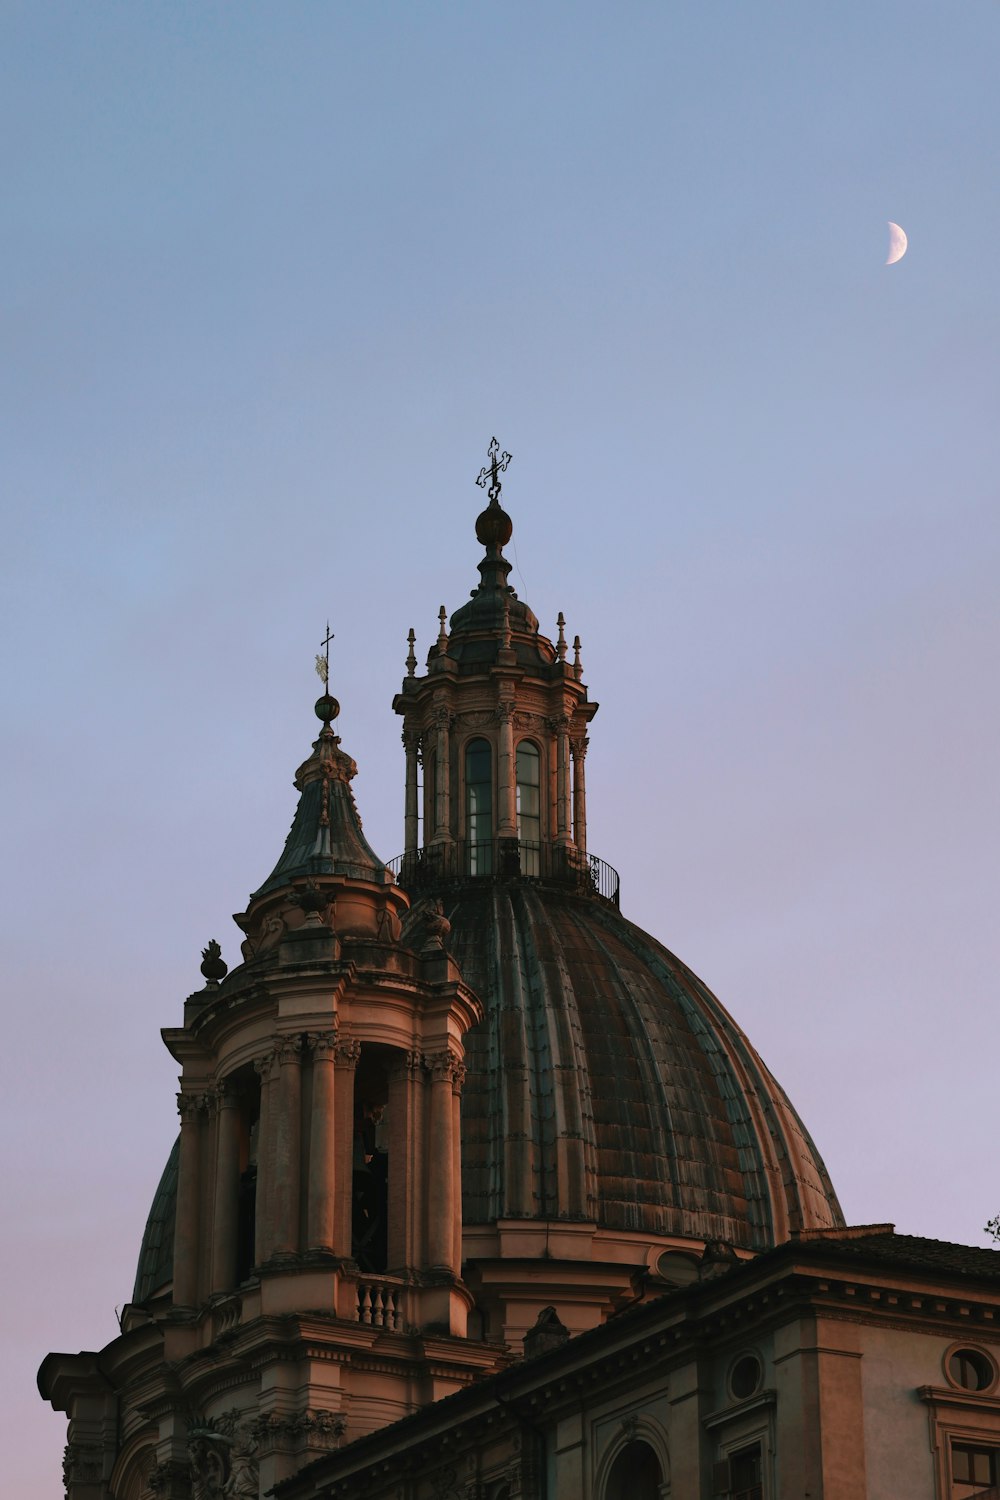 the dome of a building with a cross on top